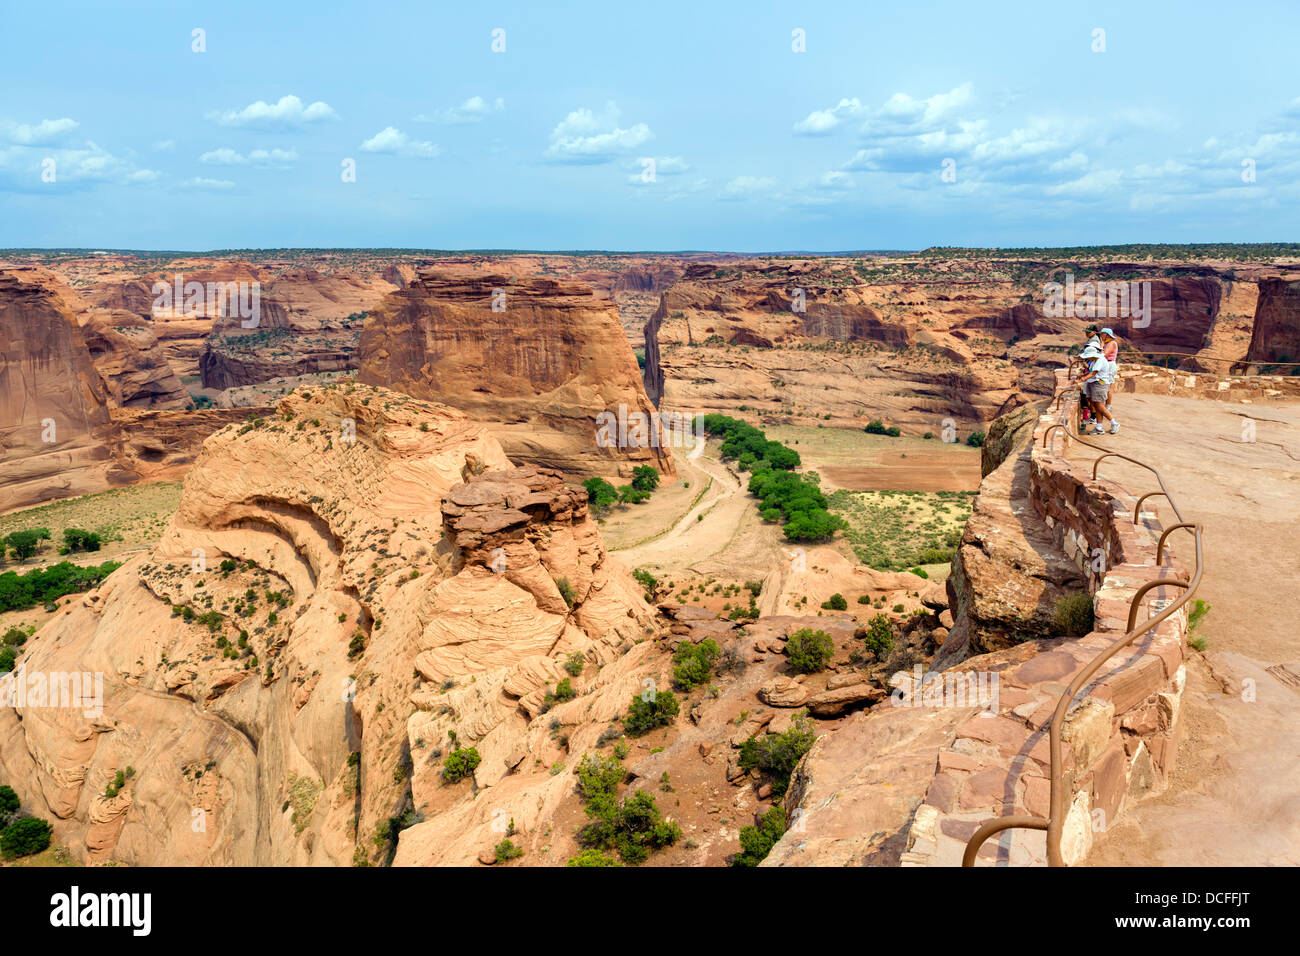 Tourists at the White House Overlook, South Rim, Canyon de Chelly National Monument, Chinle, Arizona, USA Stock Photo